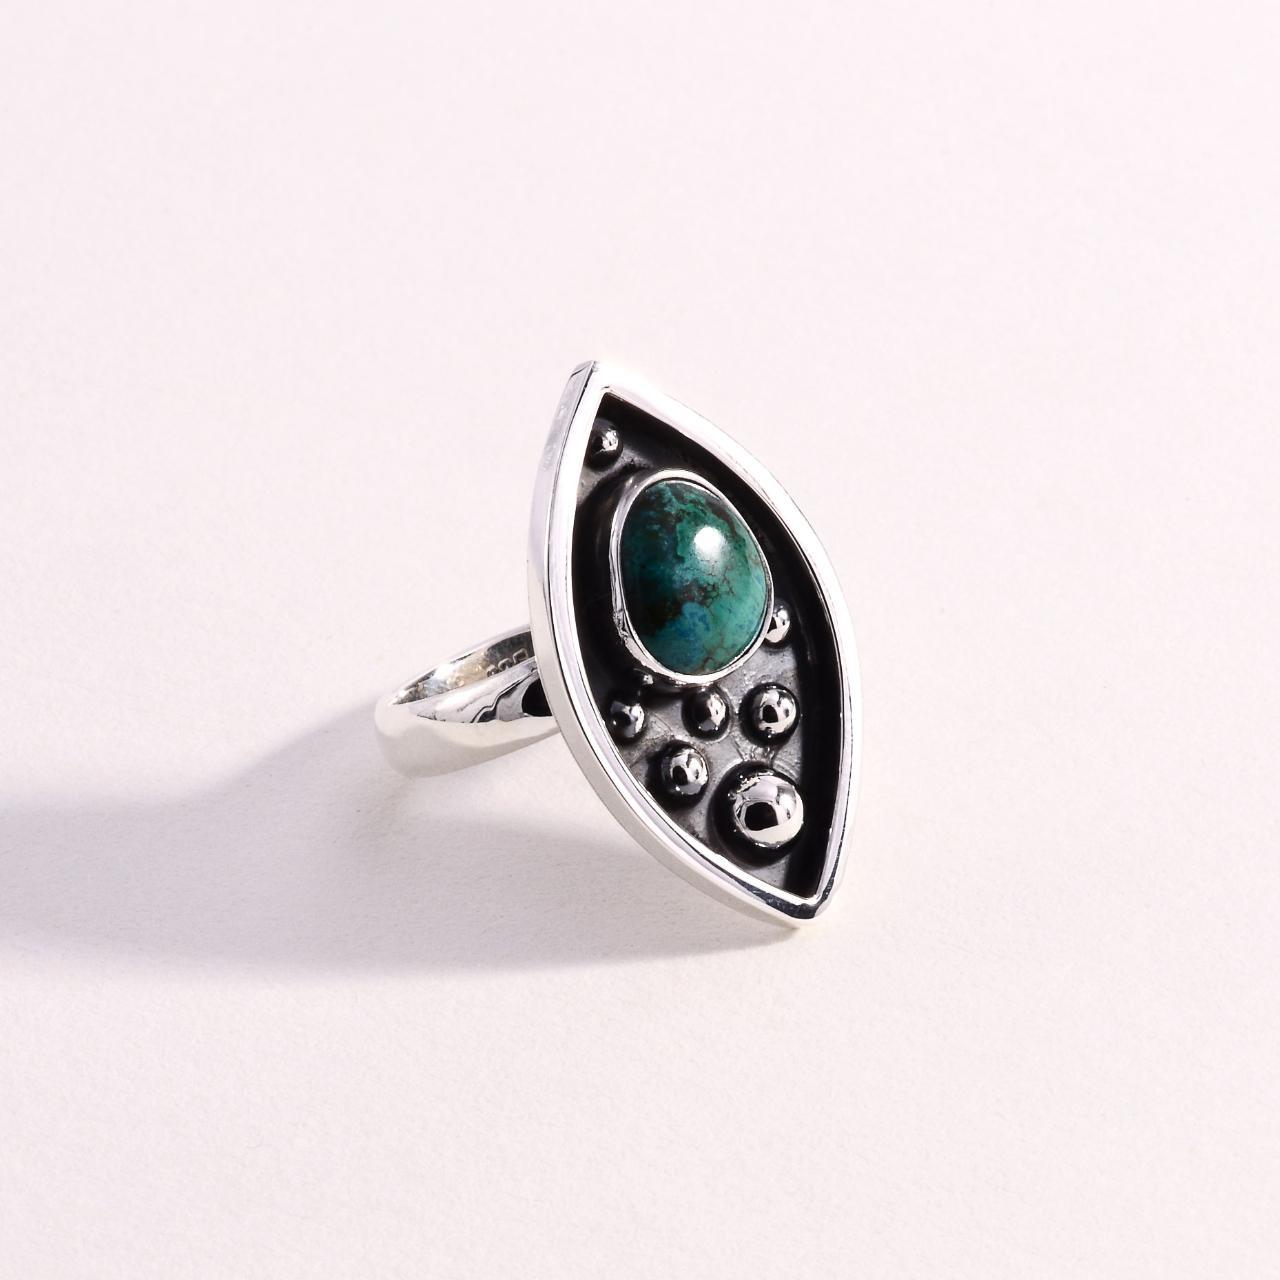 Product Image 2 - Sterling 925 Chrysocolla Ring

Sterling Silver

Size